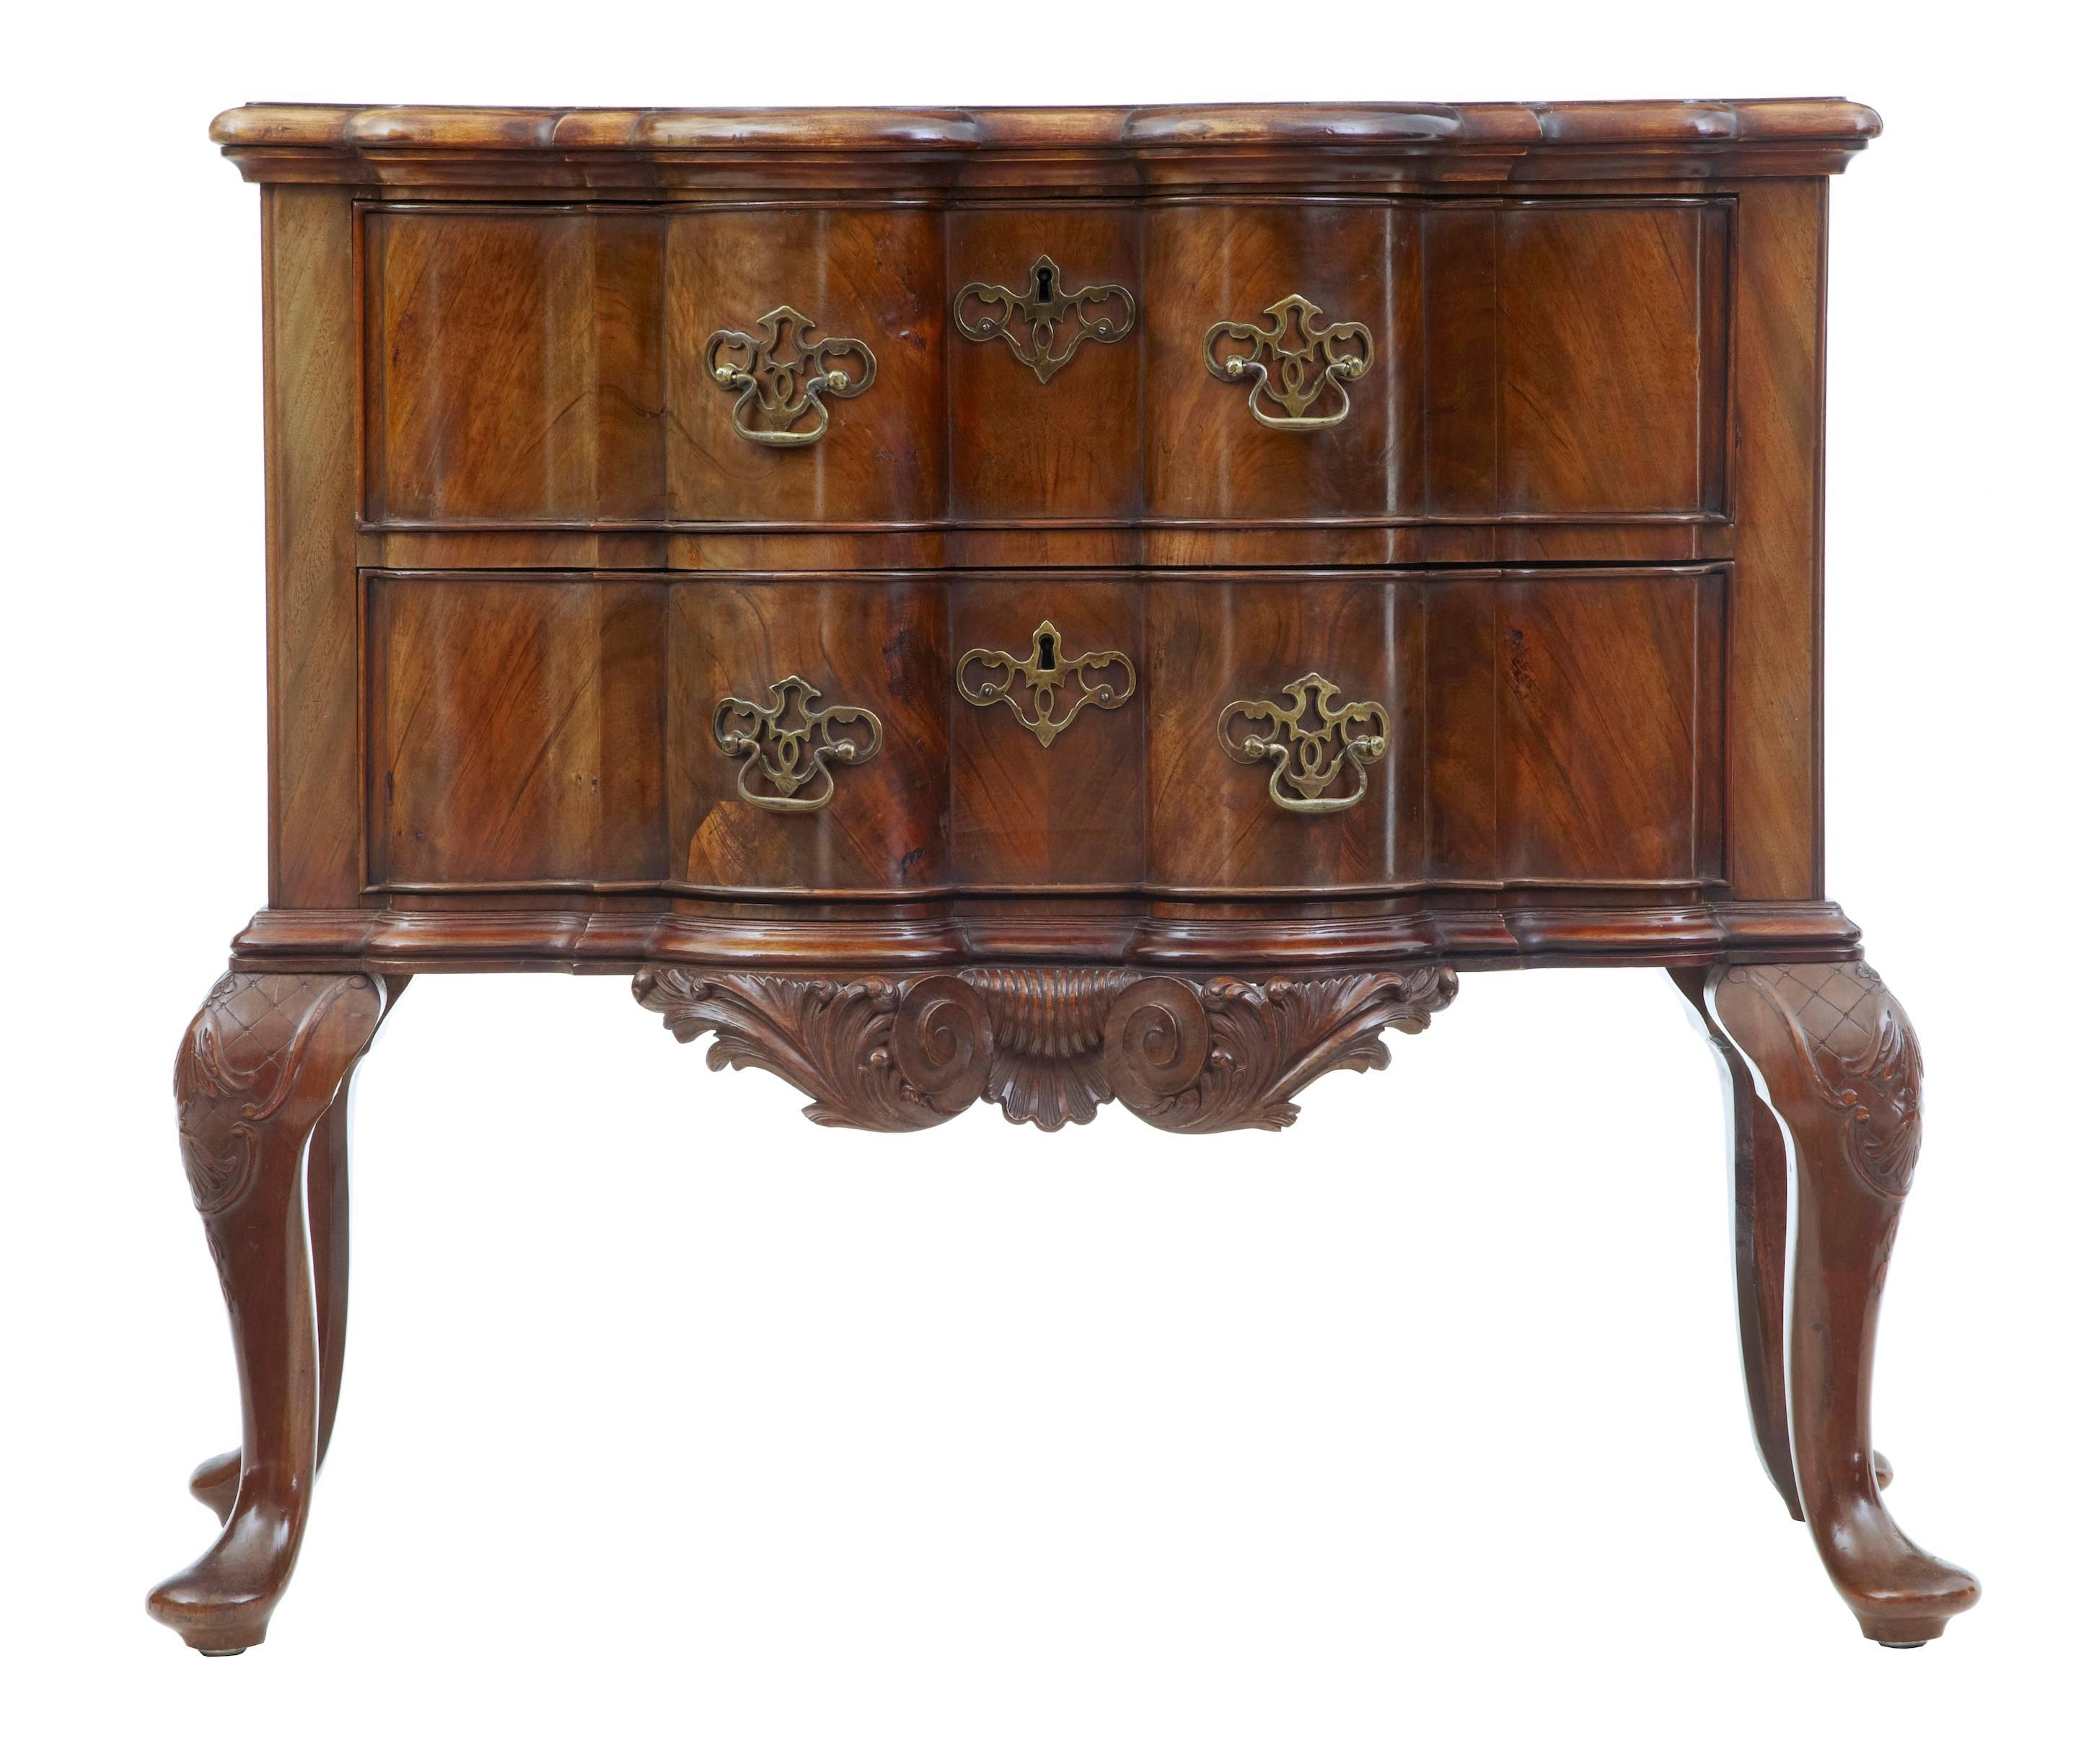 Good quality commode by lysberg & Hansen, circa 1910.
Shaped front with two drawers.
Standing on four cabriole legs on pad foot.
Oak lined drawers.
Slight fading to on top edge.
Measures: 
Height: 29 3/4